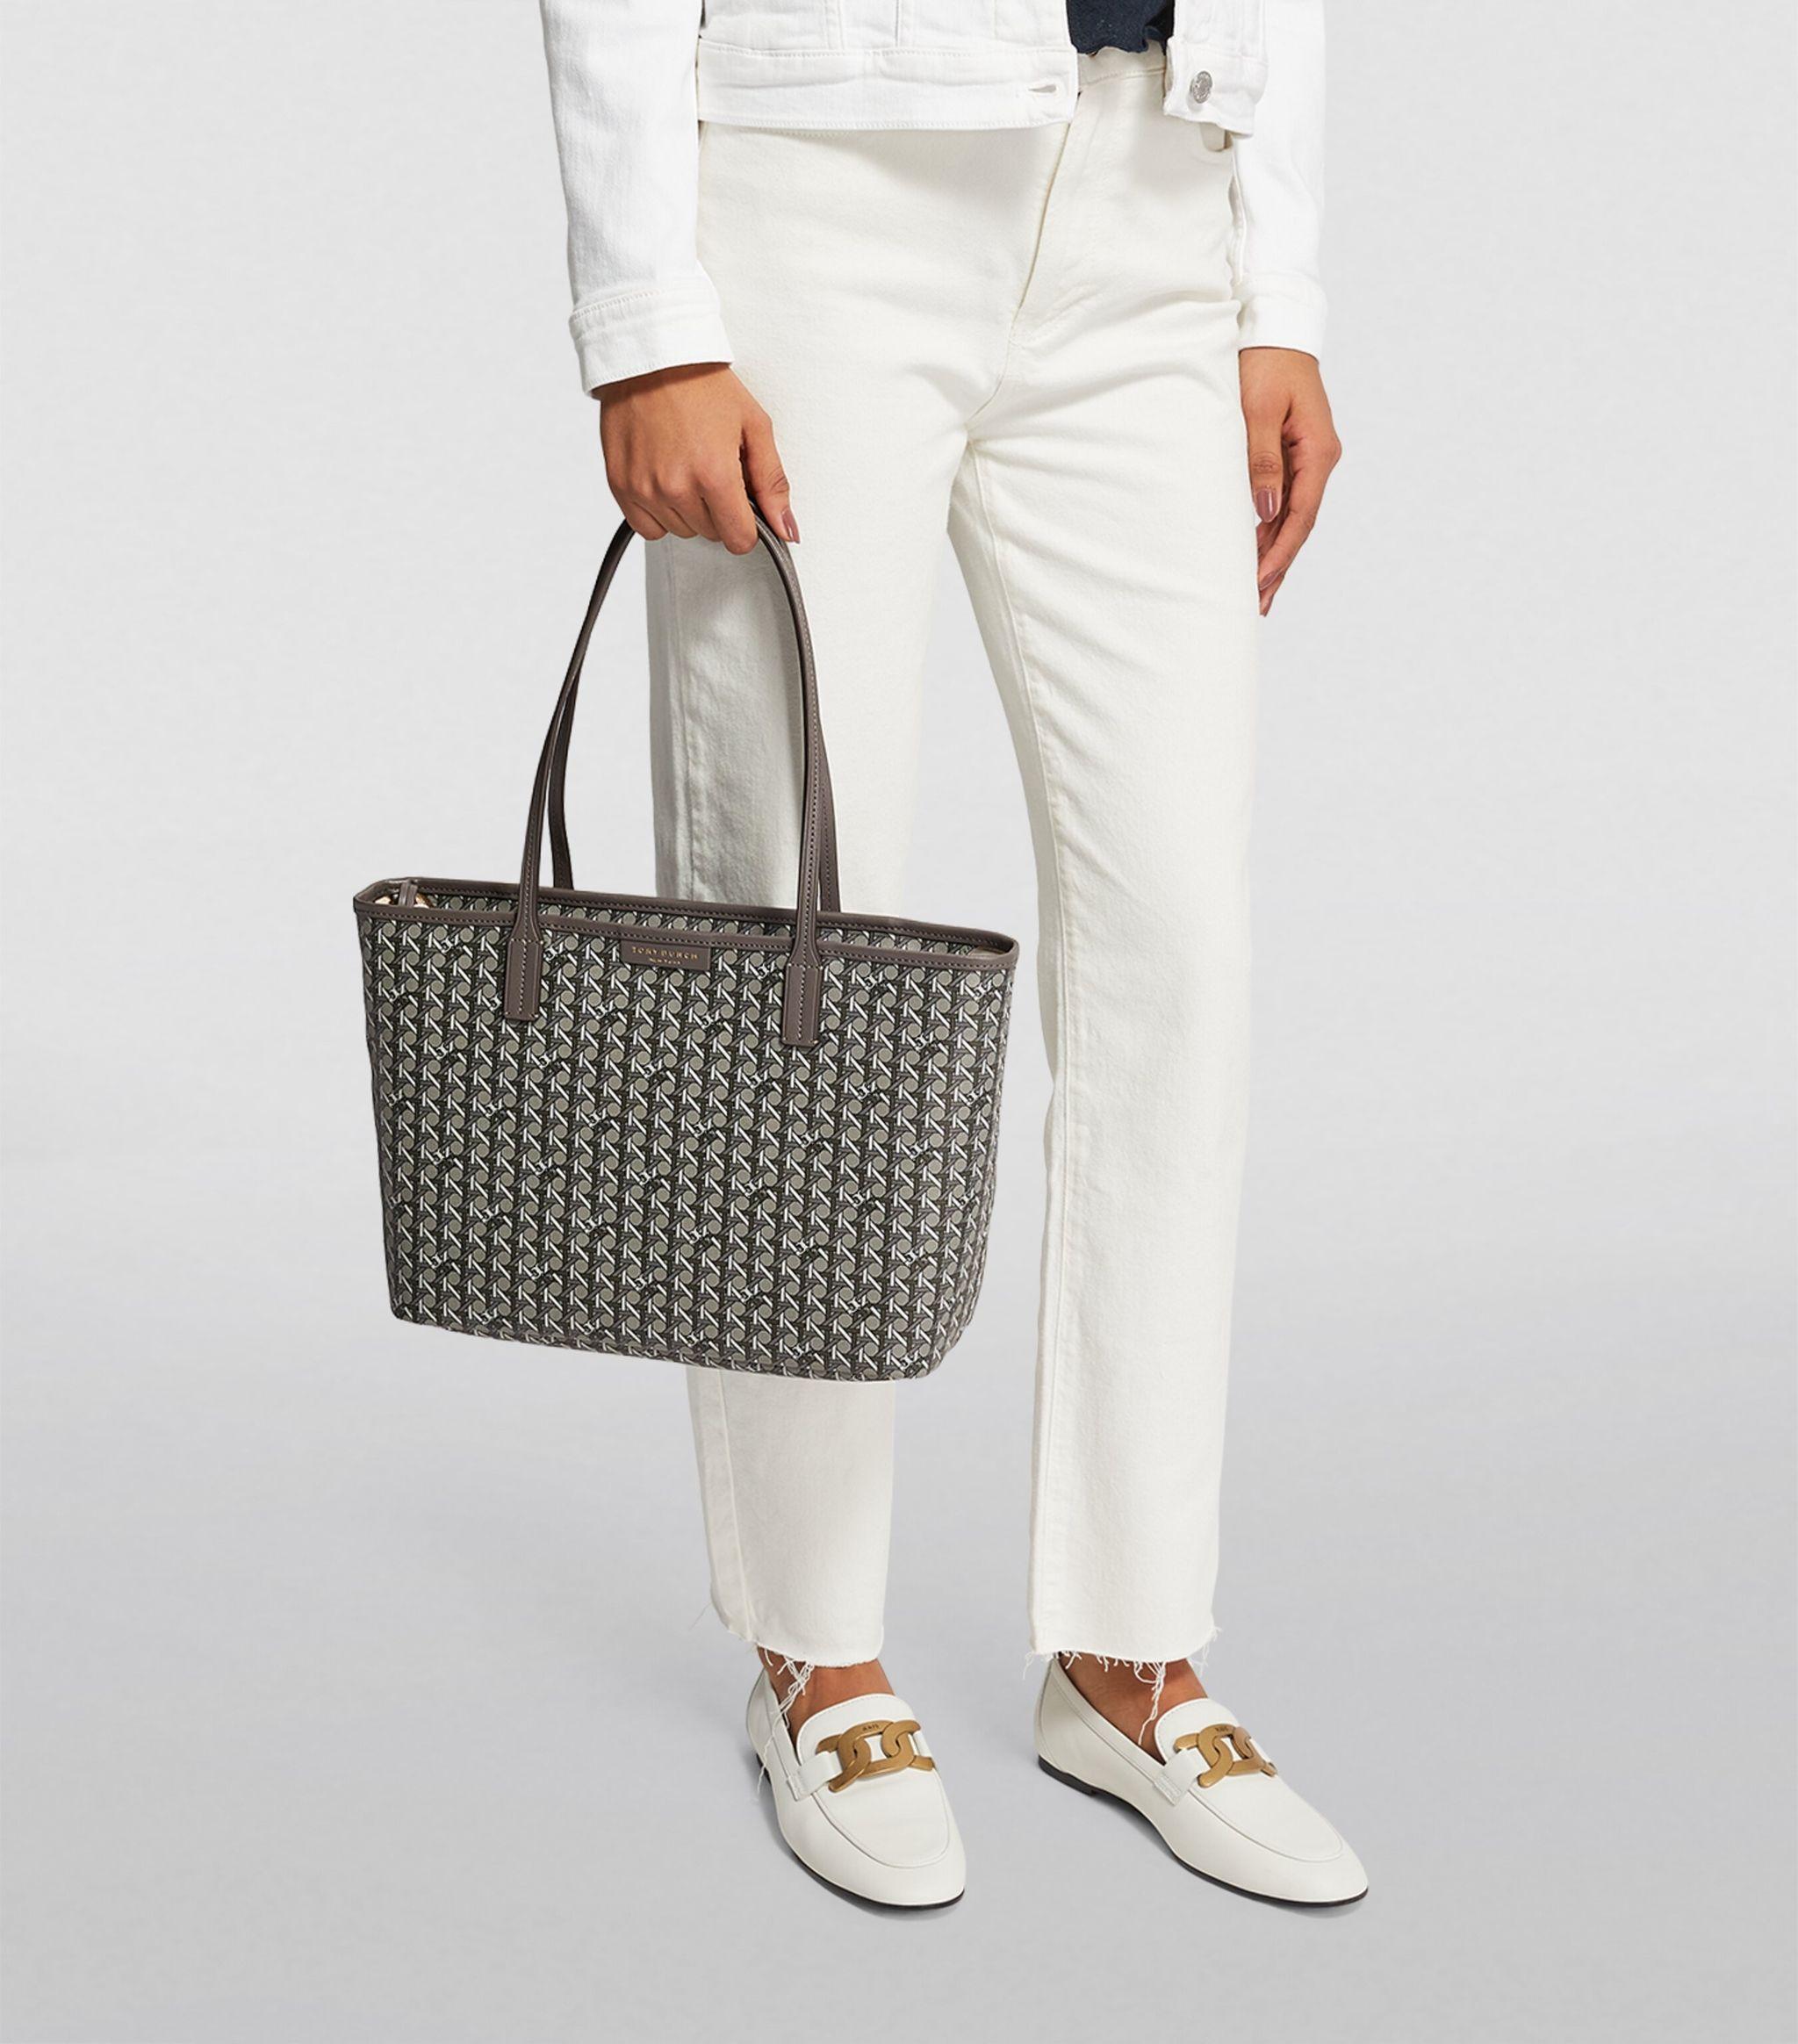 Tory Burch Ever Ready Tote Bag in Gray